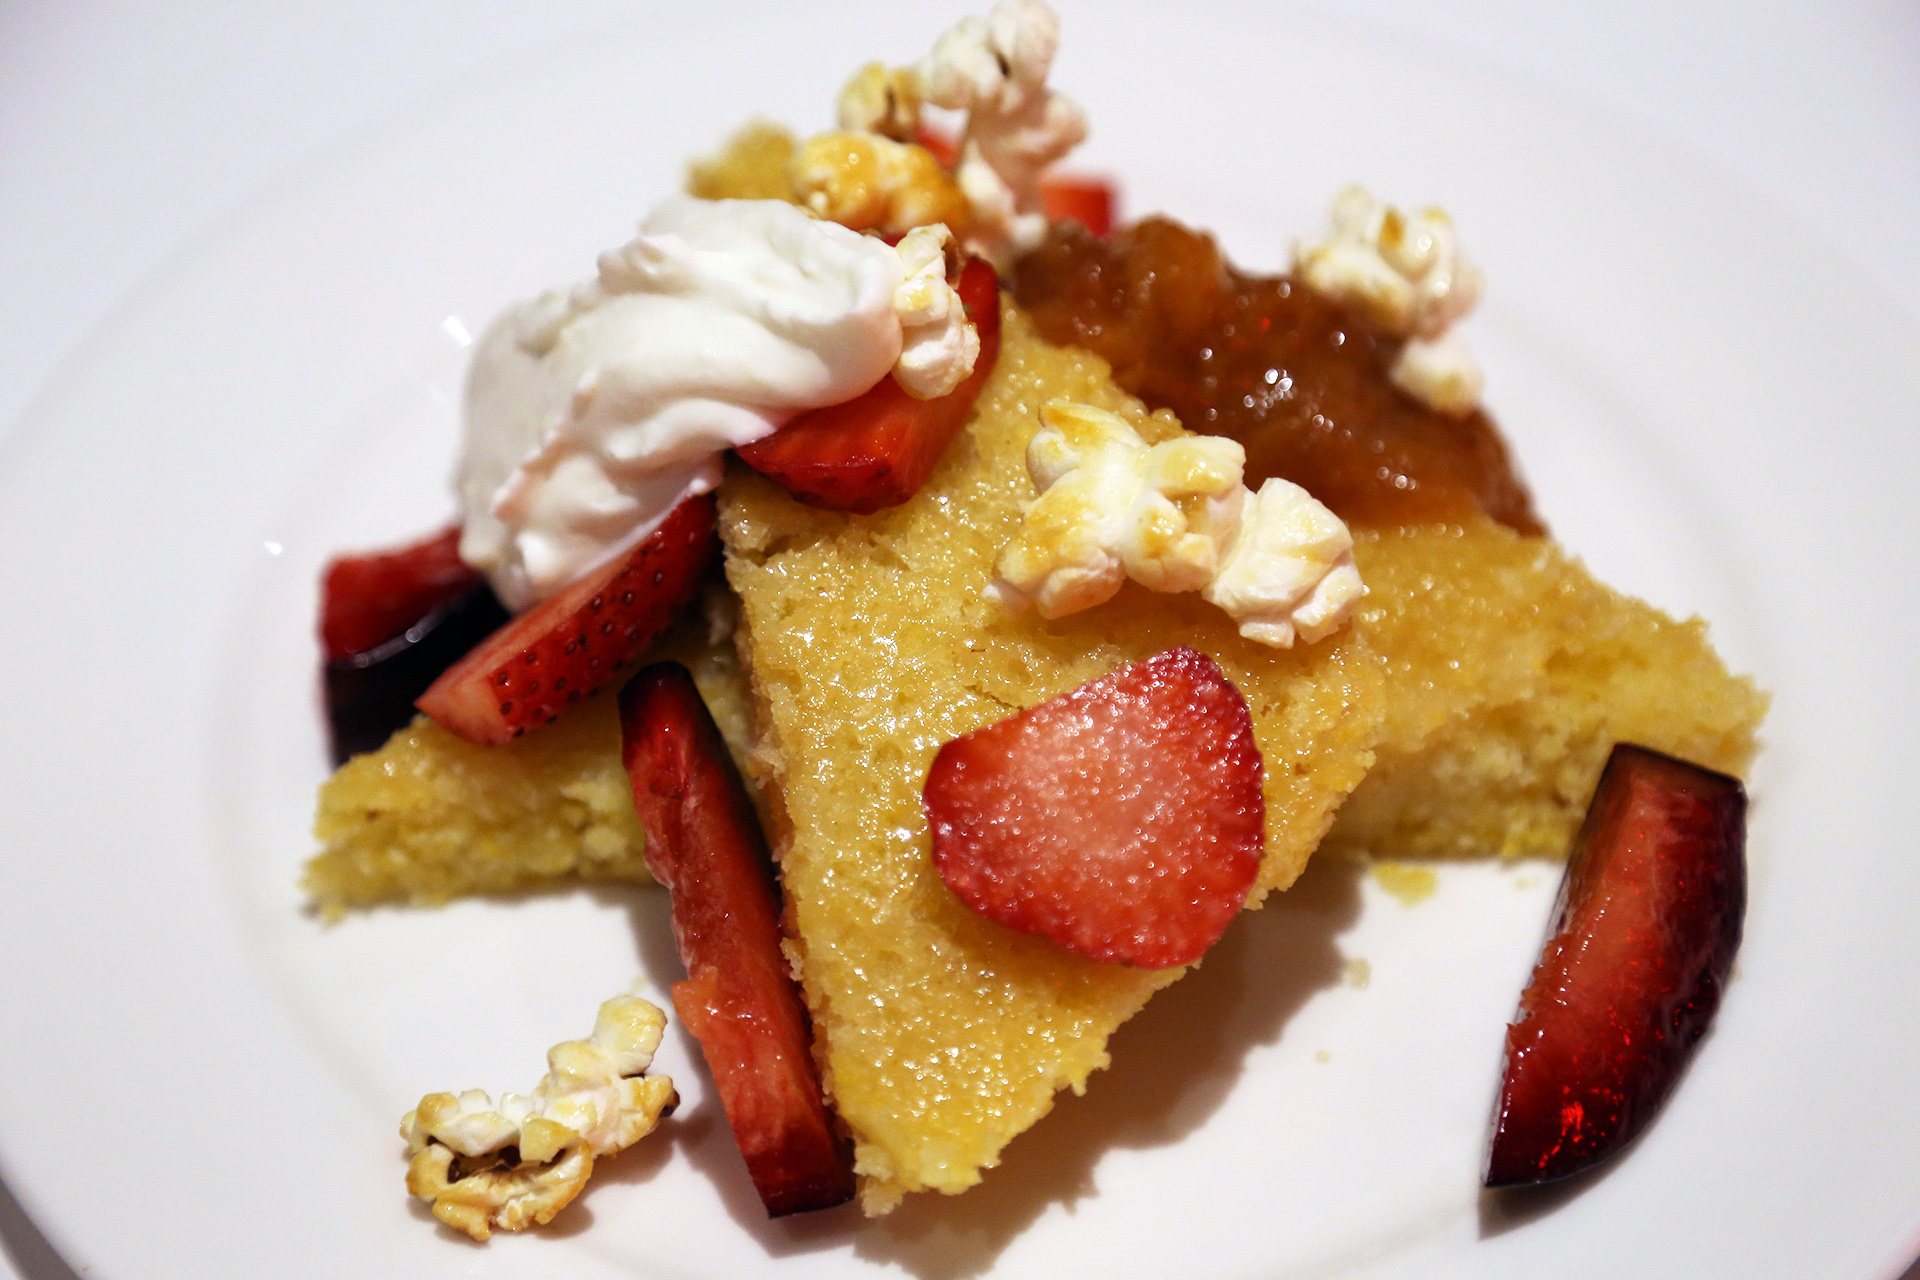 Polenta cake topped with ricotta cream, summer fruit, and a surprising and wonderful garnish of kettle corn.